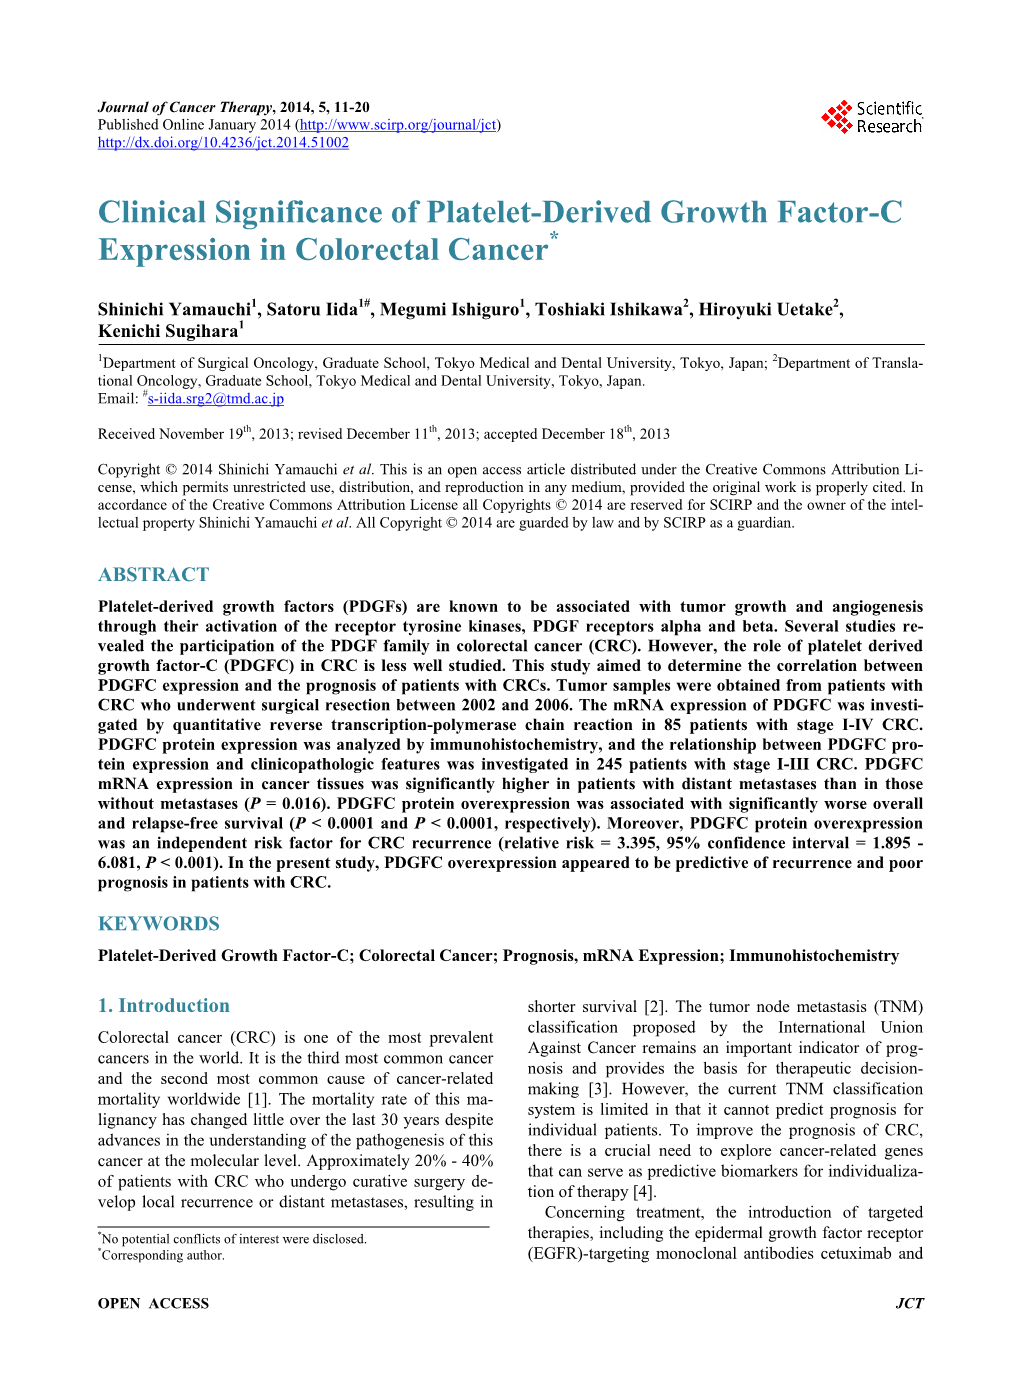 Clinical Significance of Platelet-Derived Growth Factor-C Expression in Colorectal Cancer*